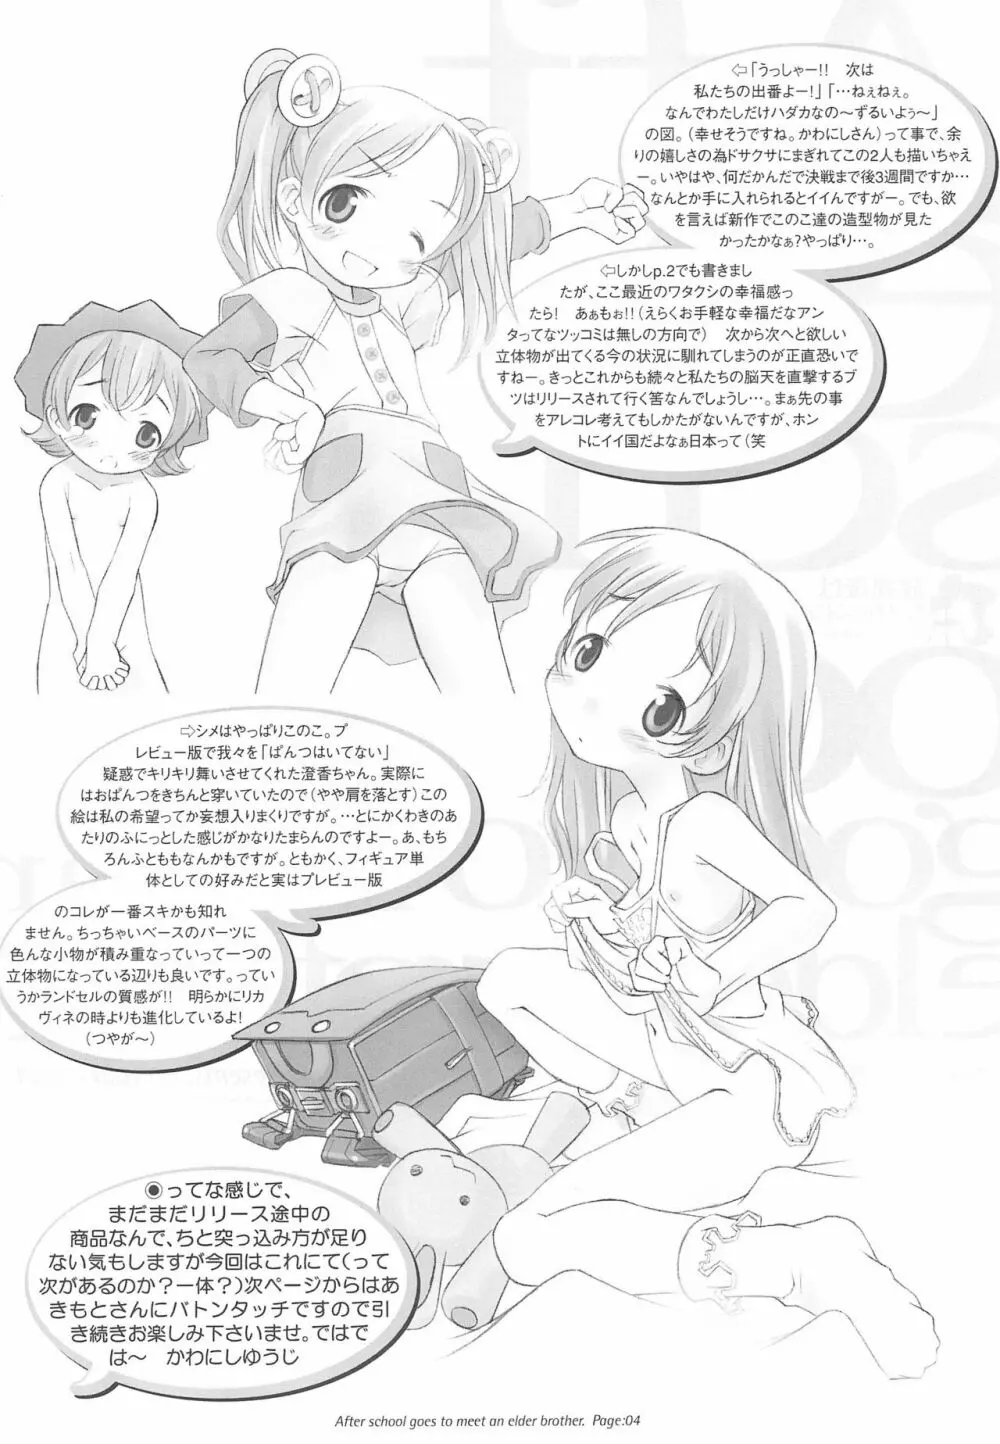 After School Goes To Meet An Elder Brother 放課後はお兄ちゃんに逢いに行きます。 4ページ